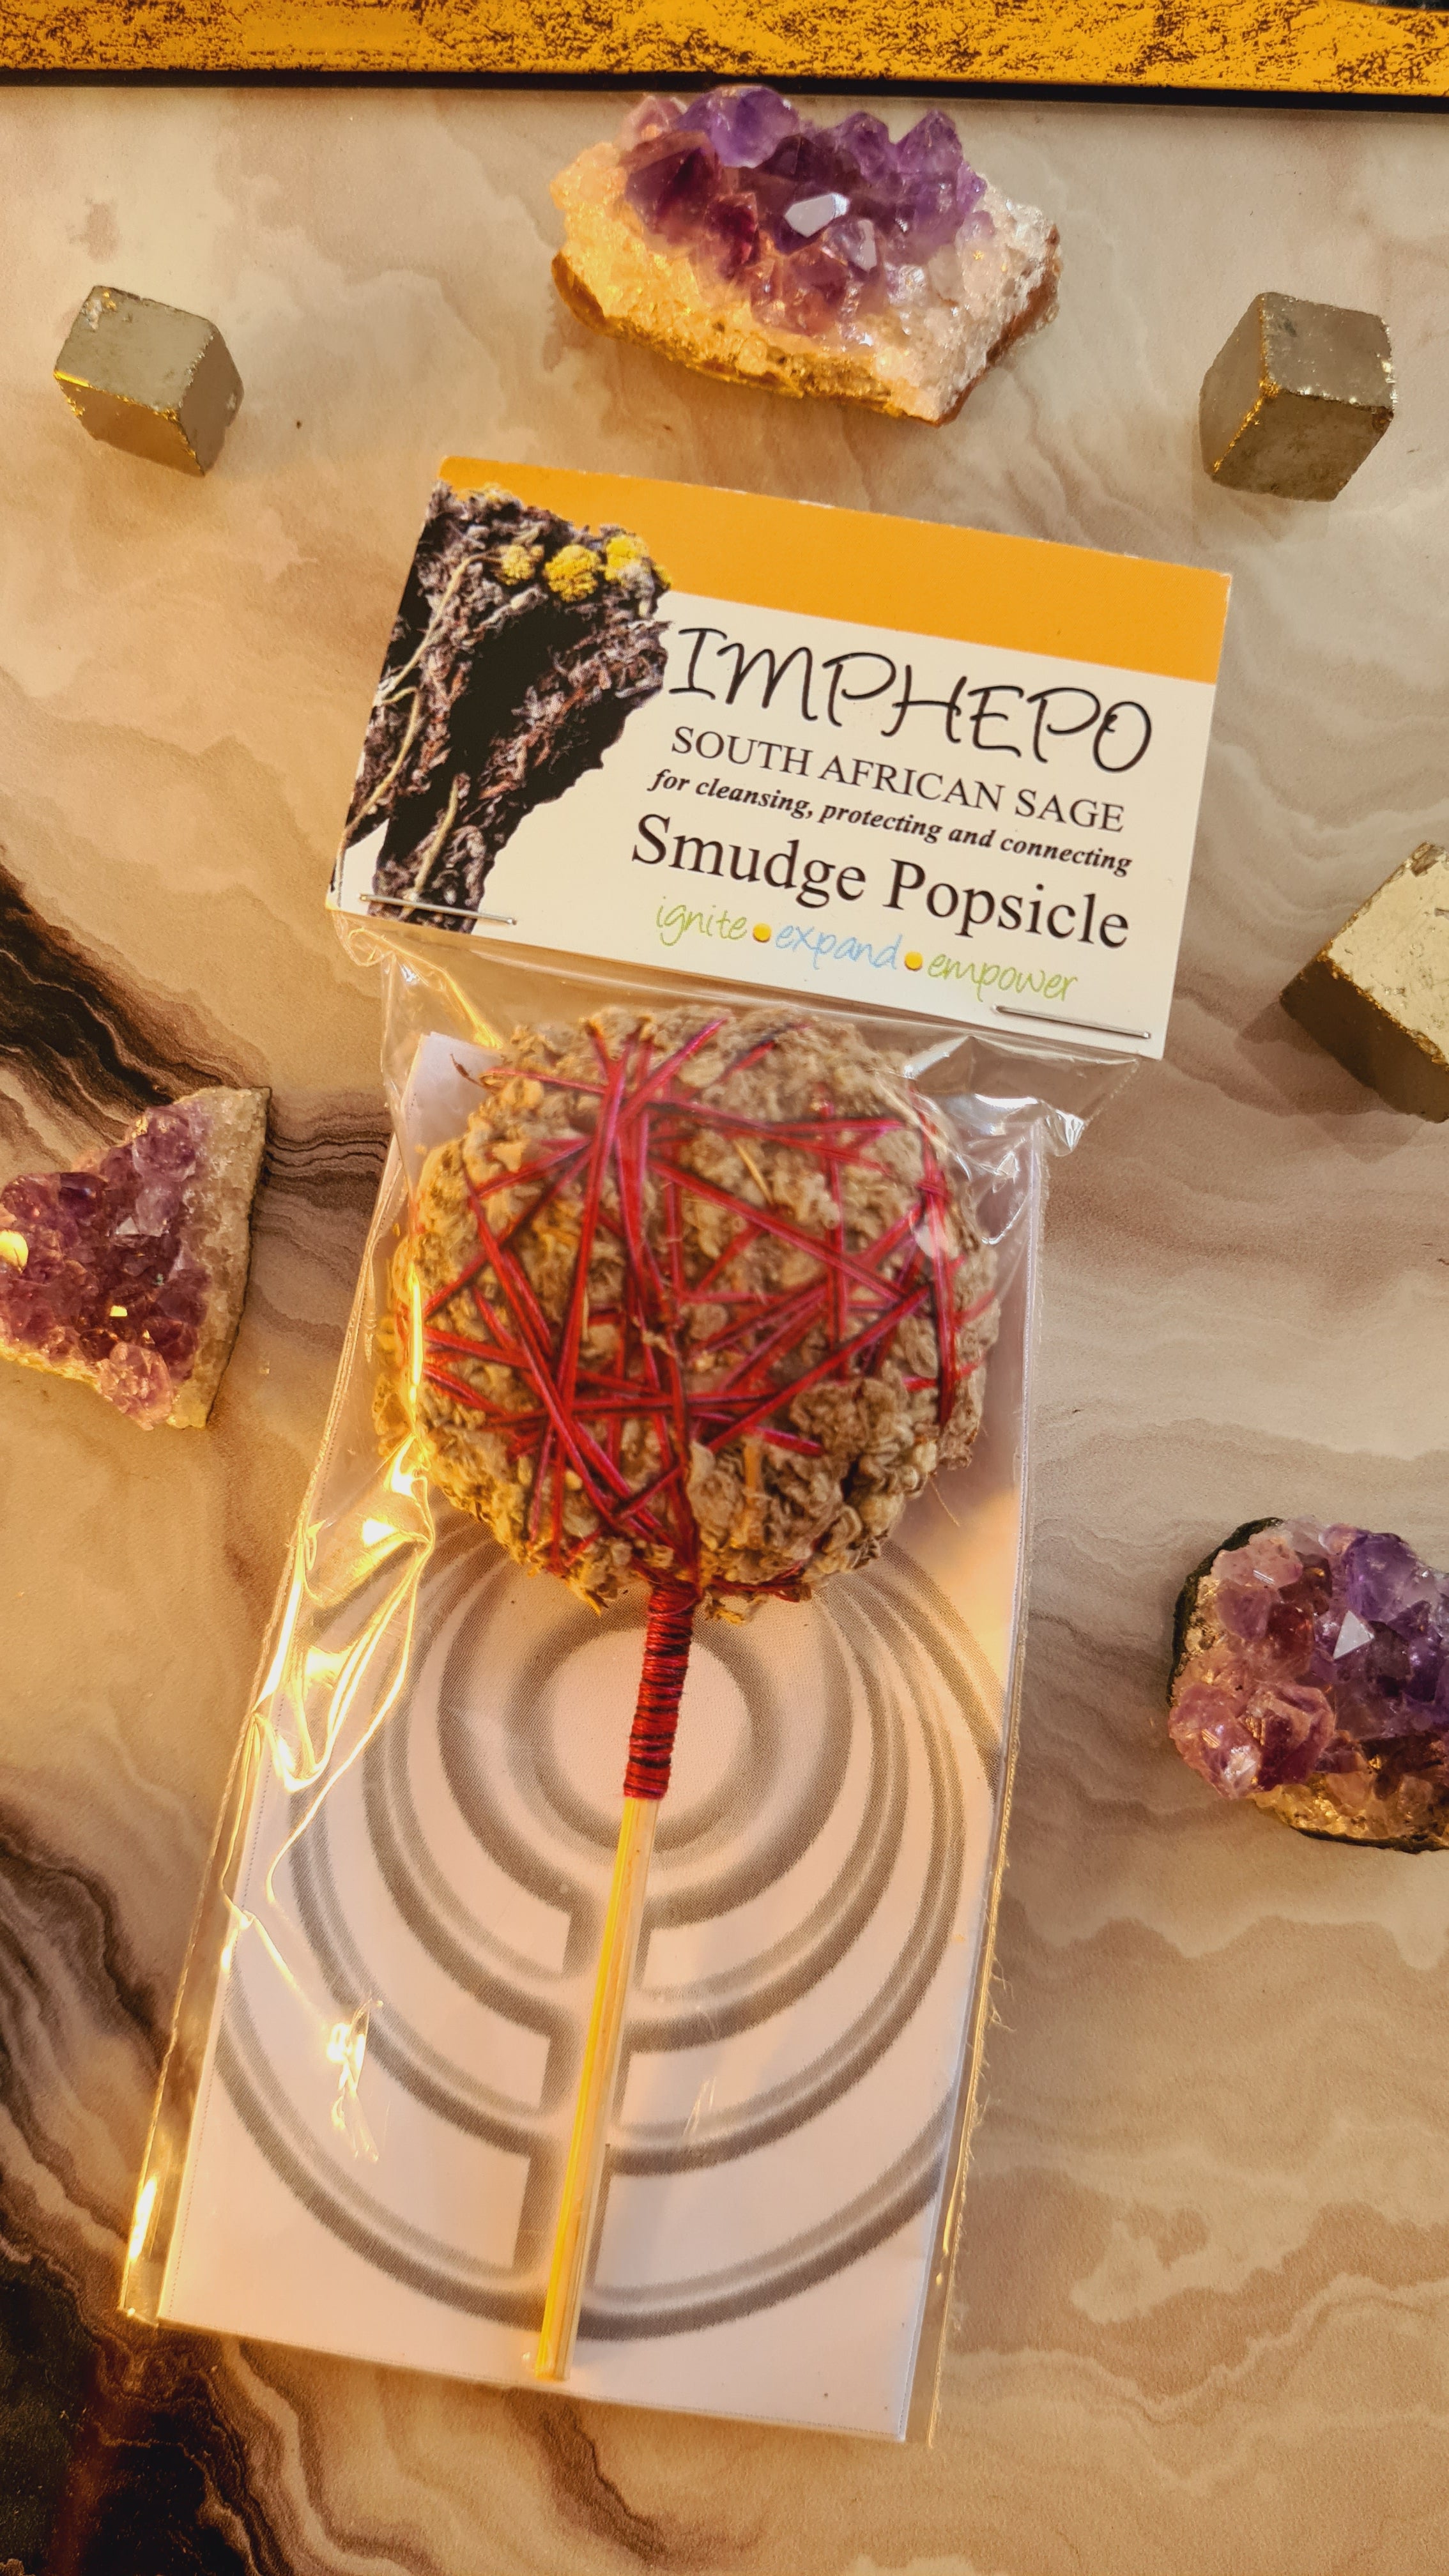 Impepho Smudge Popsicle